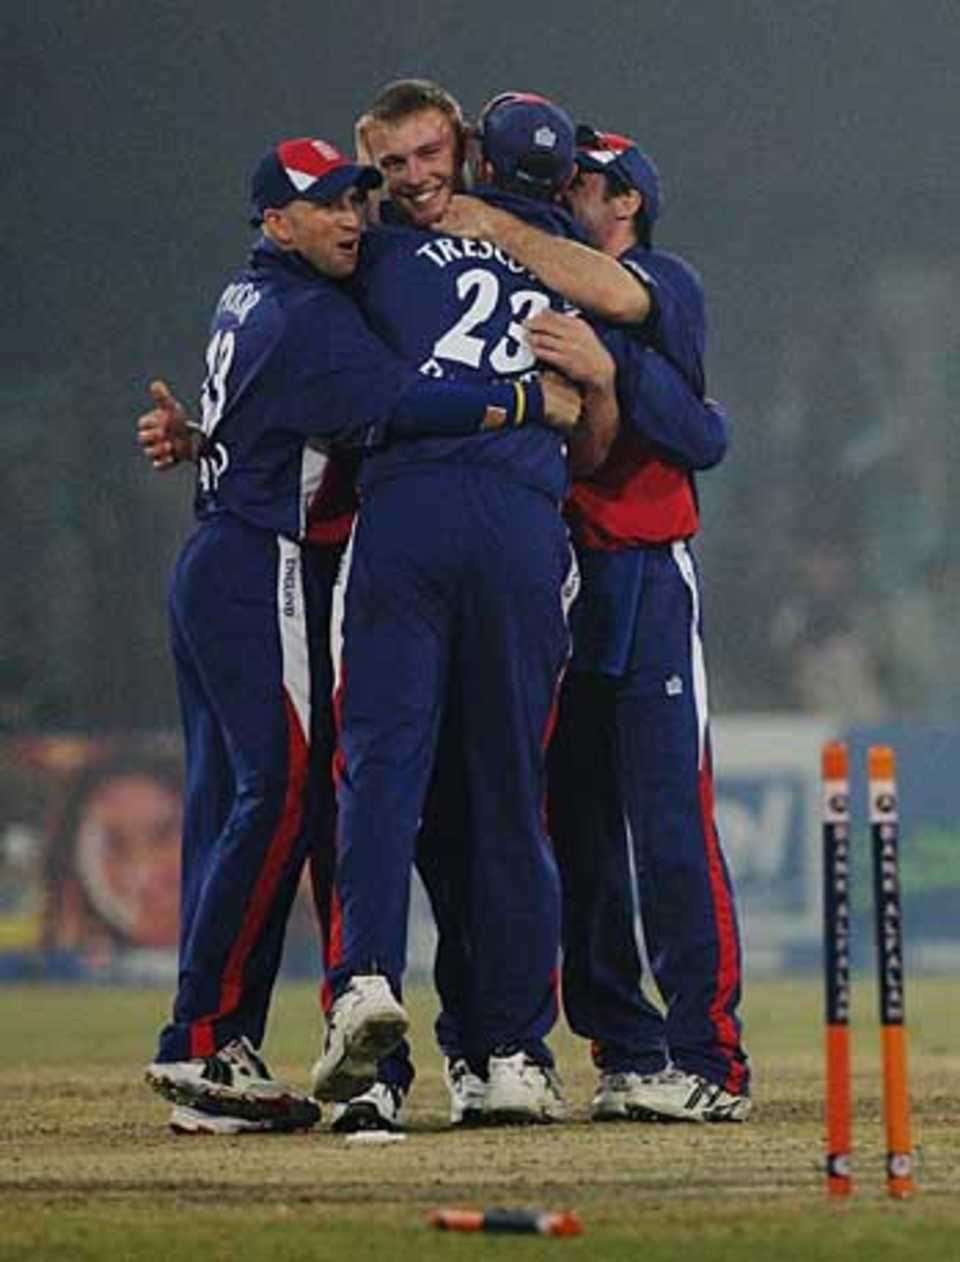 Players mob Flintoff after he takes the final wicket, completing a 42-run win for England, Pakistan v England, 1st ODI, Lahore, December 10, 2005